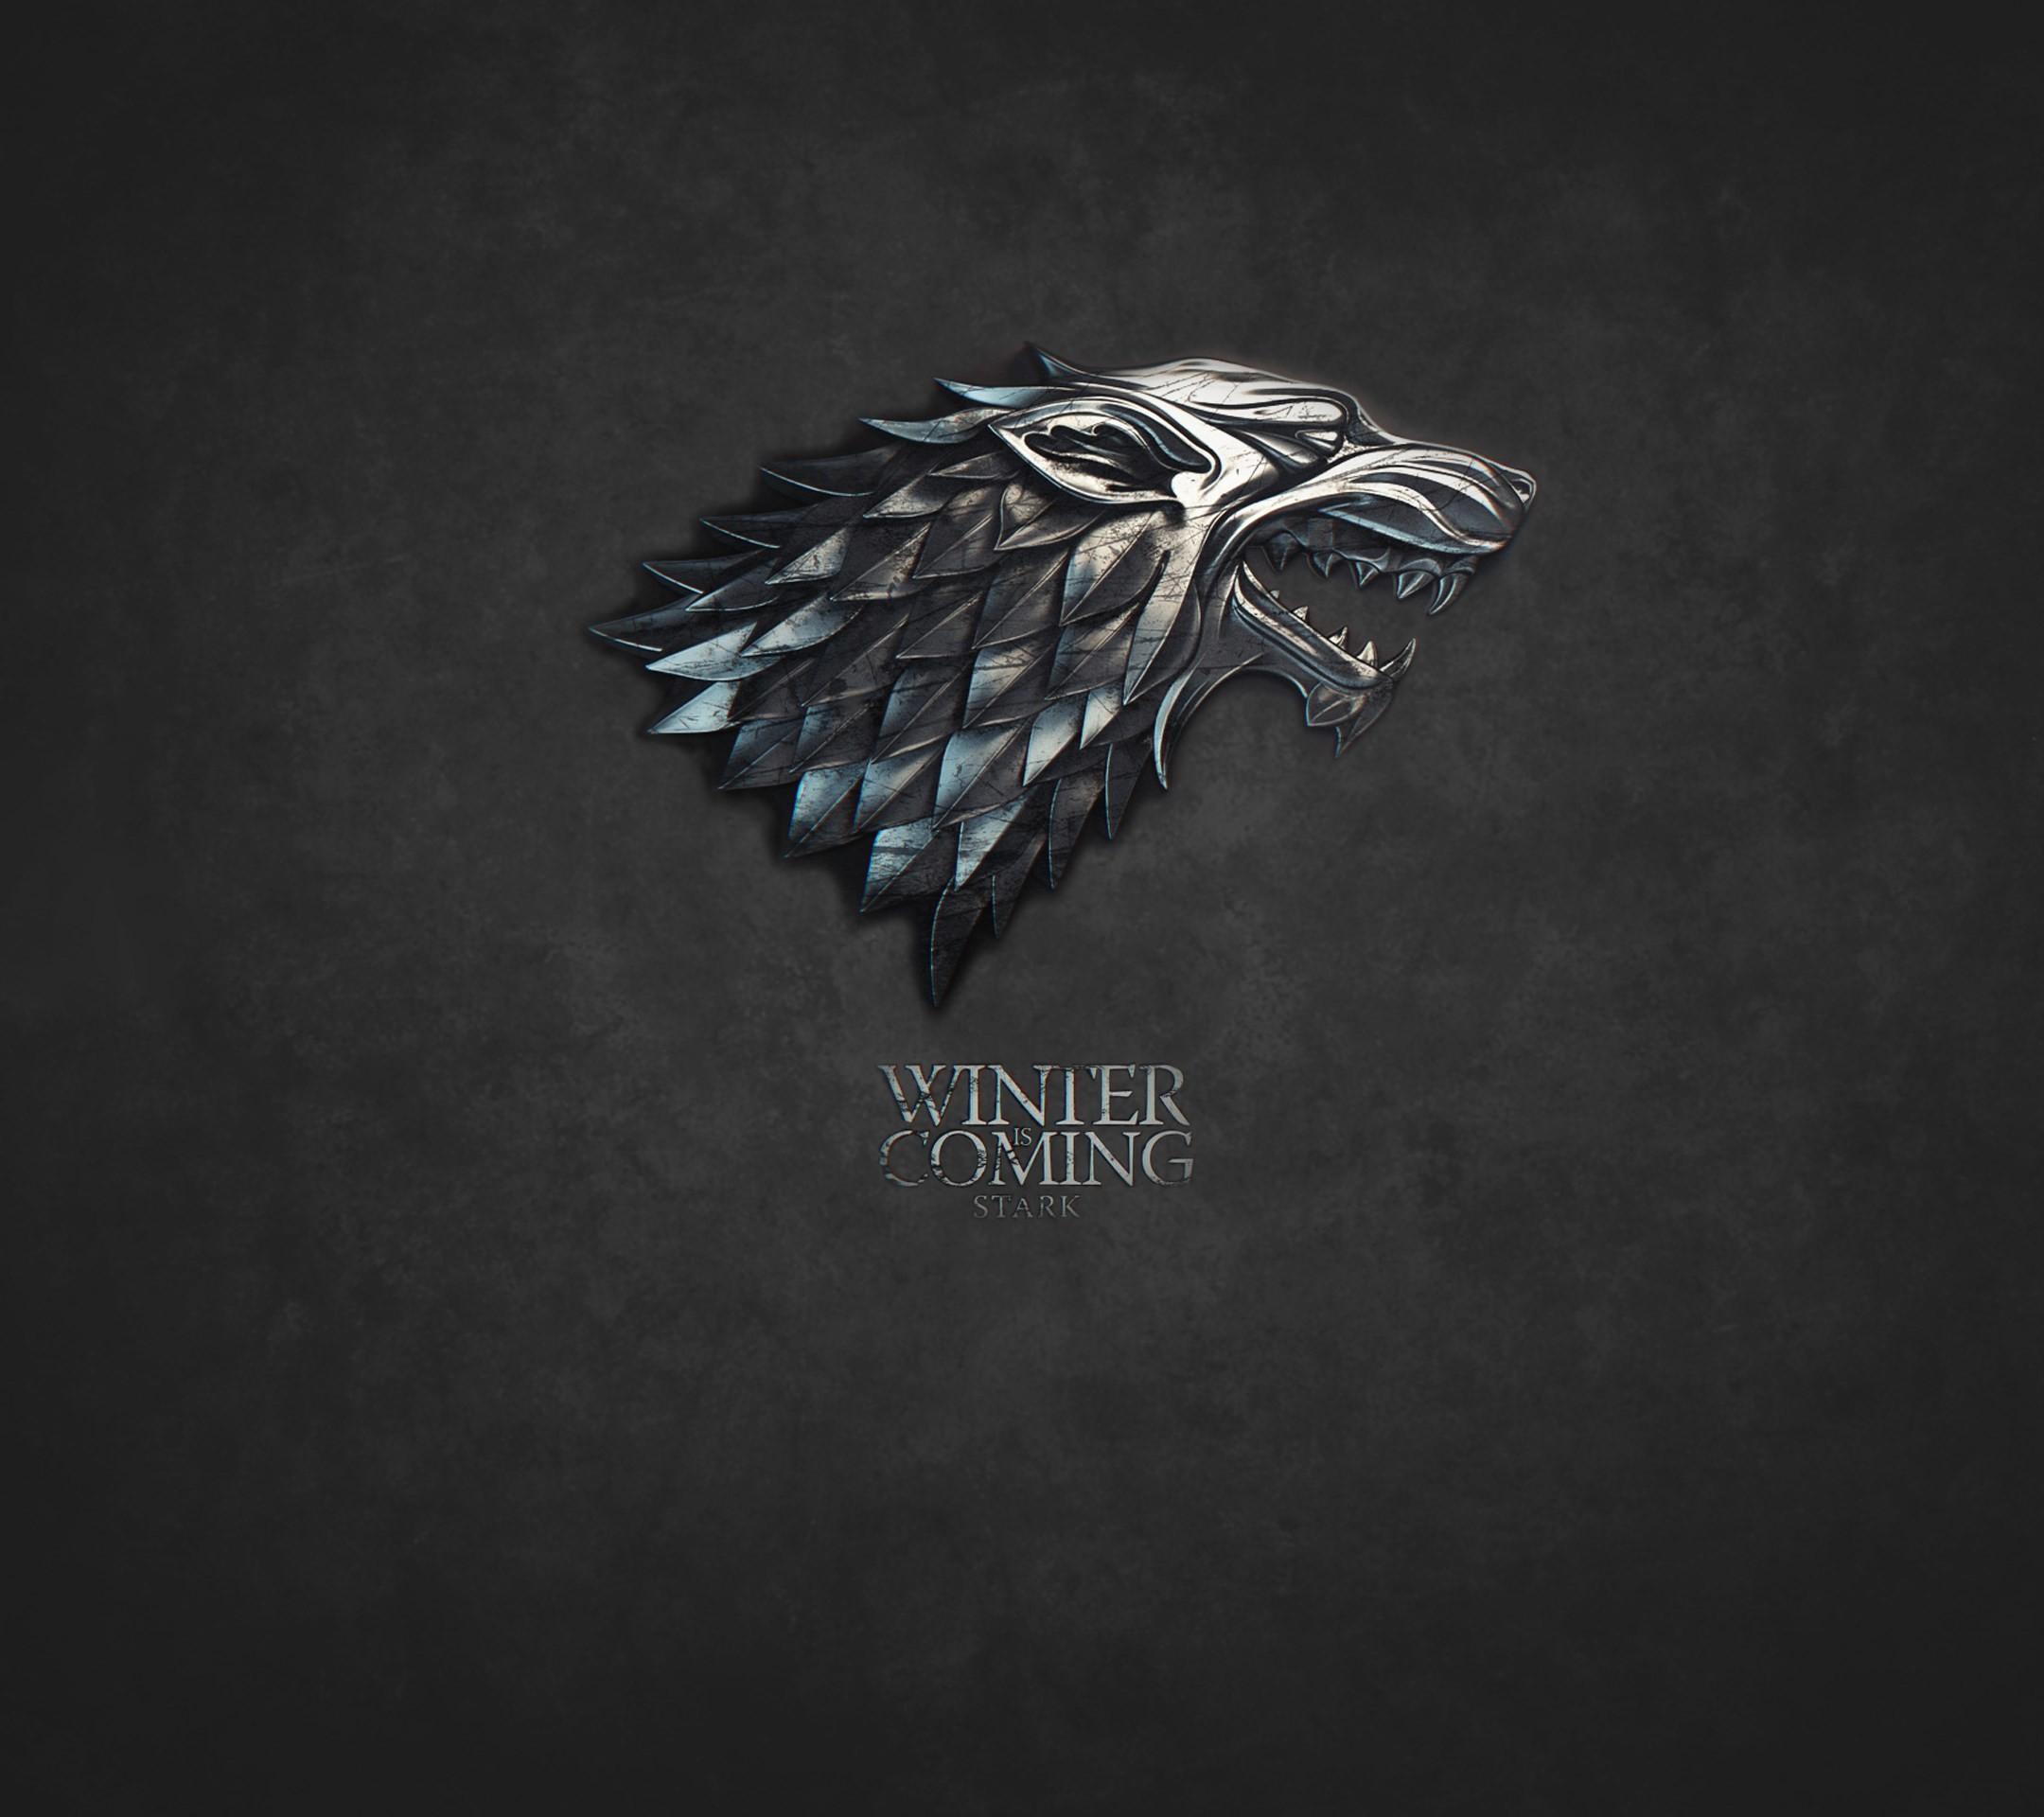 Game of Thrones Stark Logo Poster – My Hot Posters